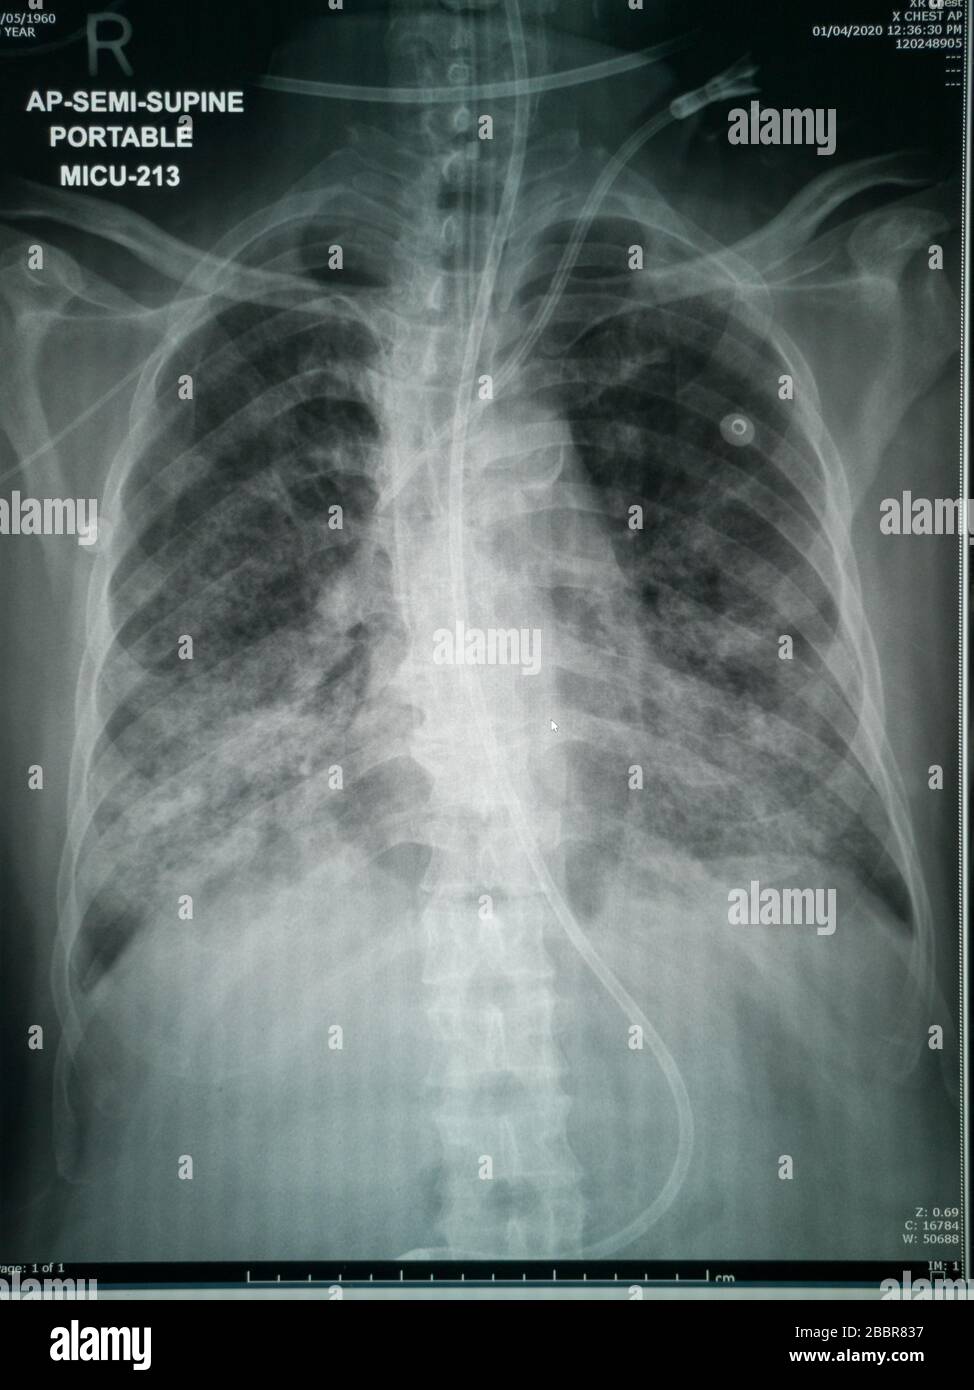 Chest X-Ray of suspected Corona virus patient high quality image showing changes in the lung due to Covid-19 virus with chest tubes Stock Photo